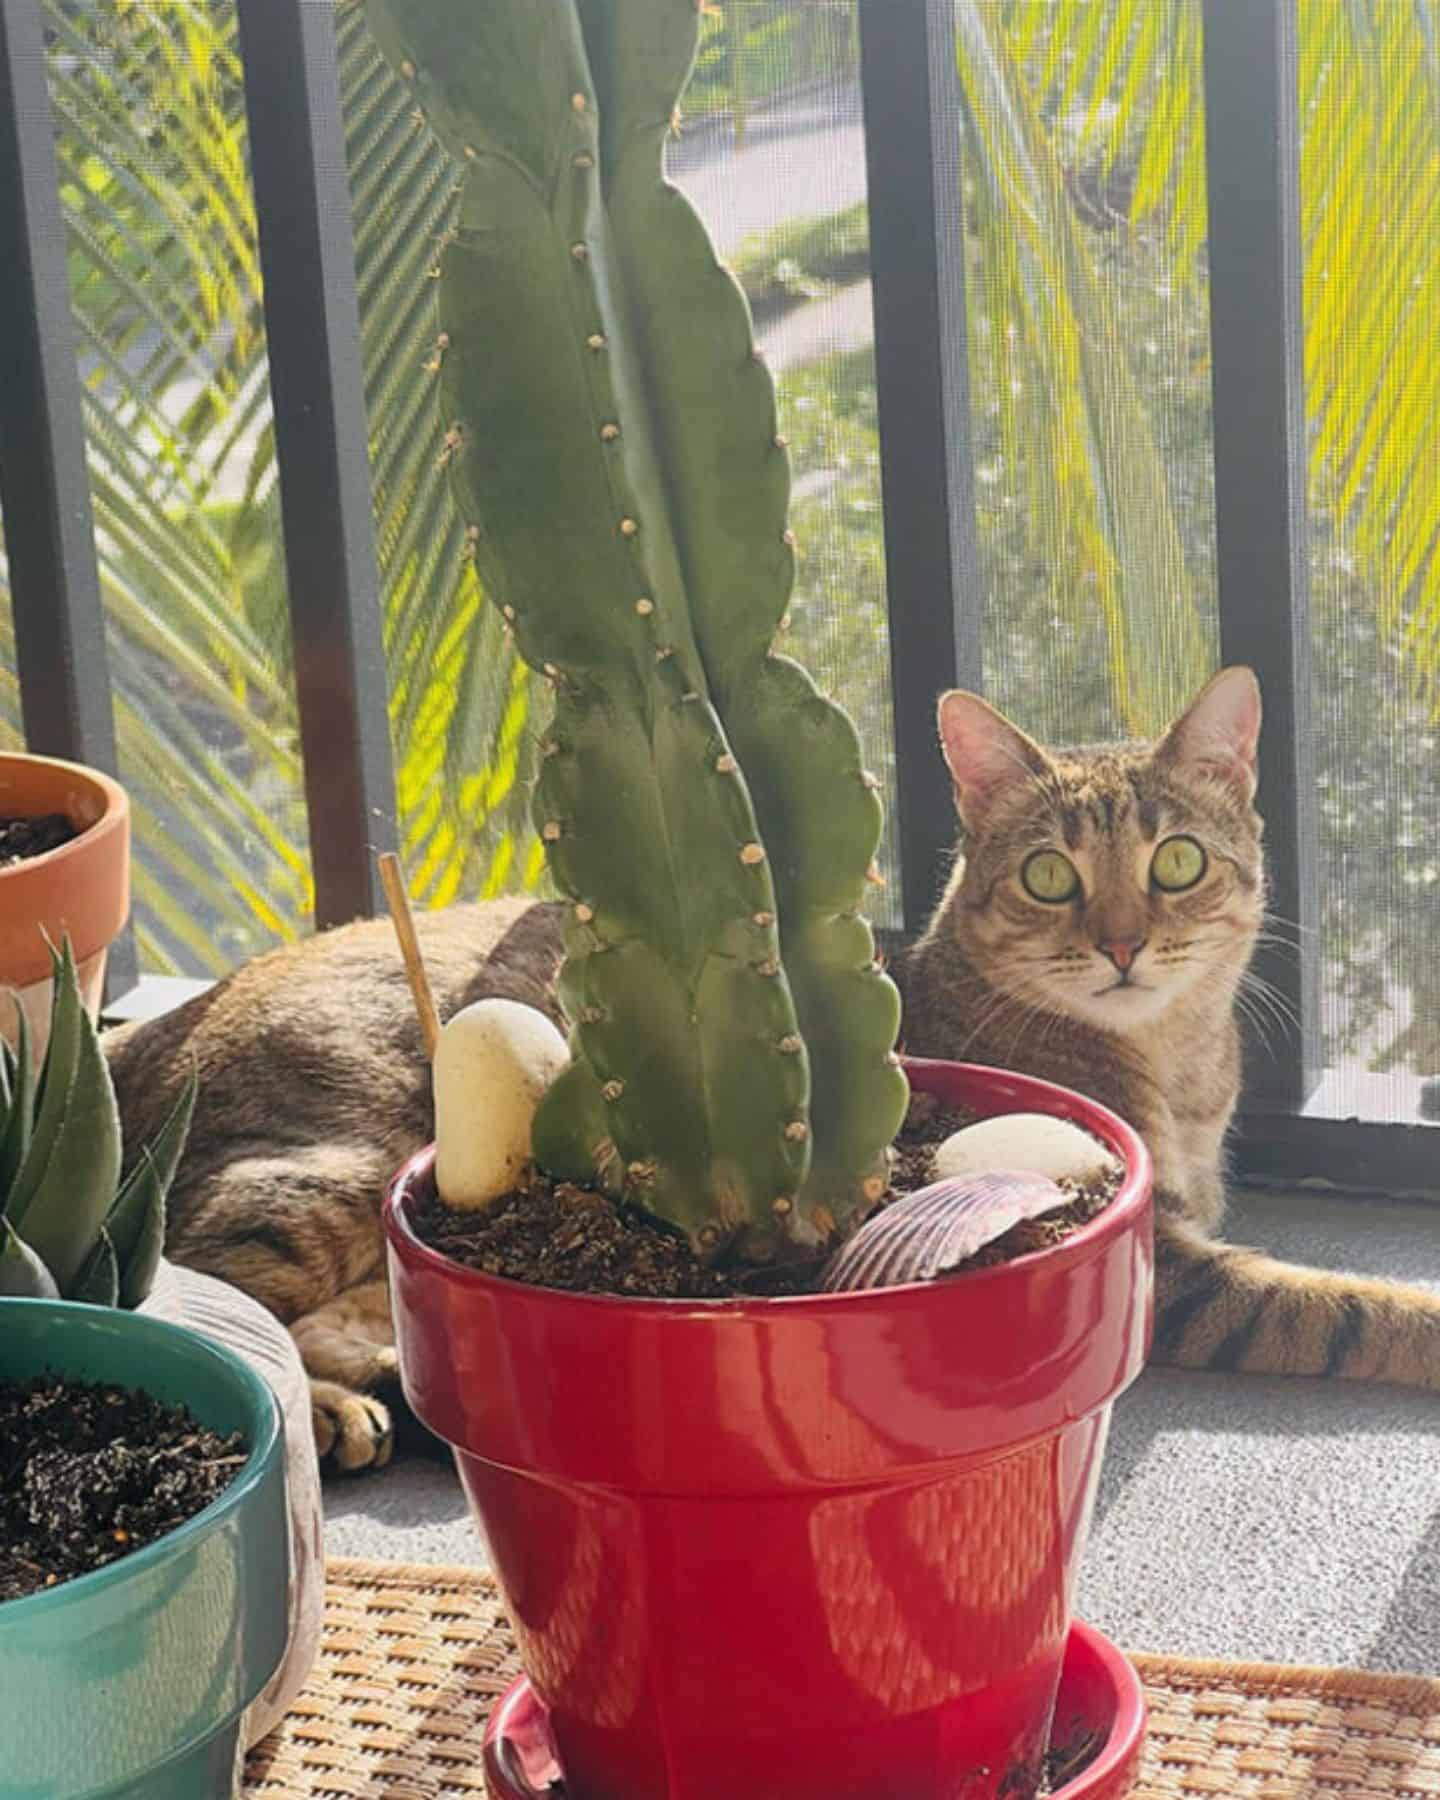 photo of cat and cactus in a red pot